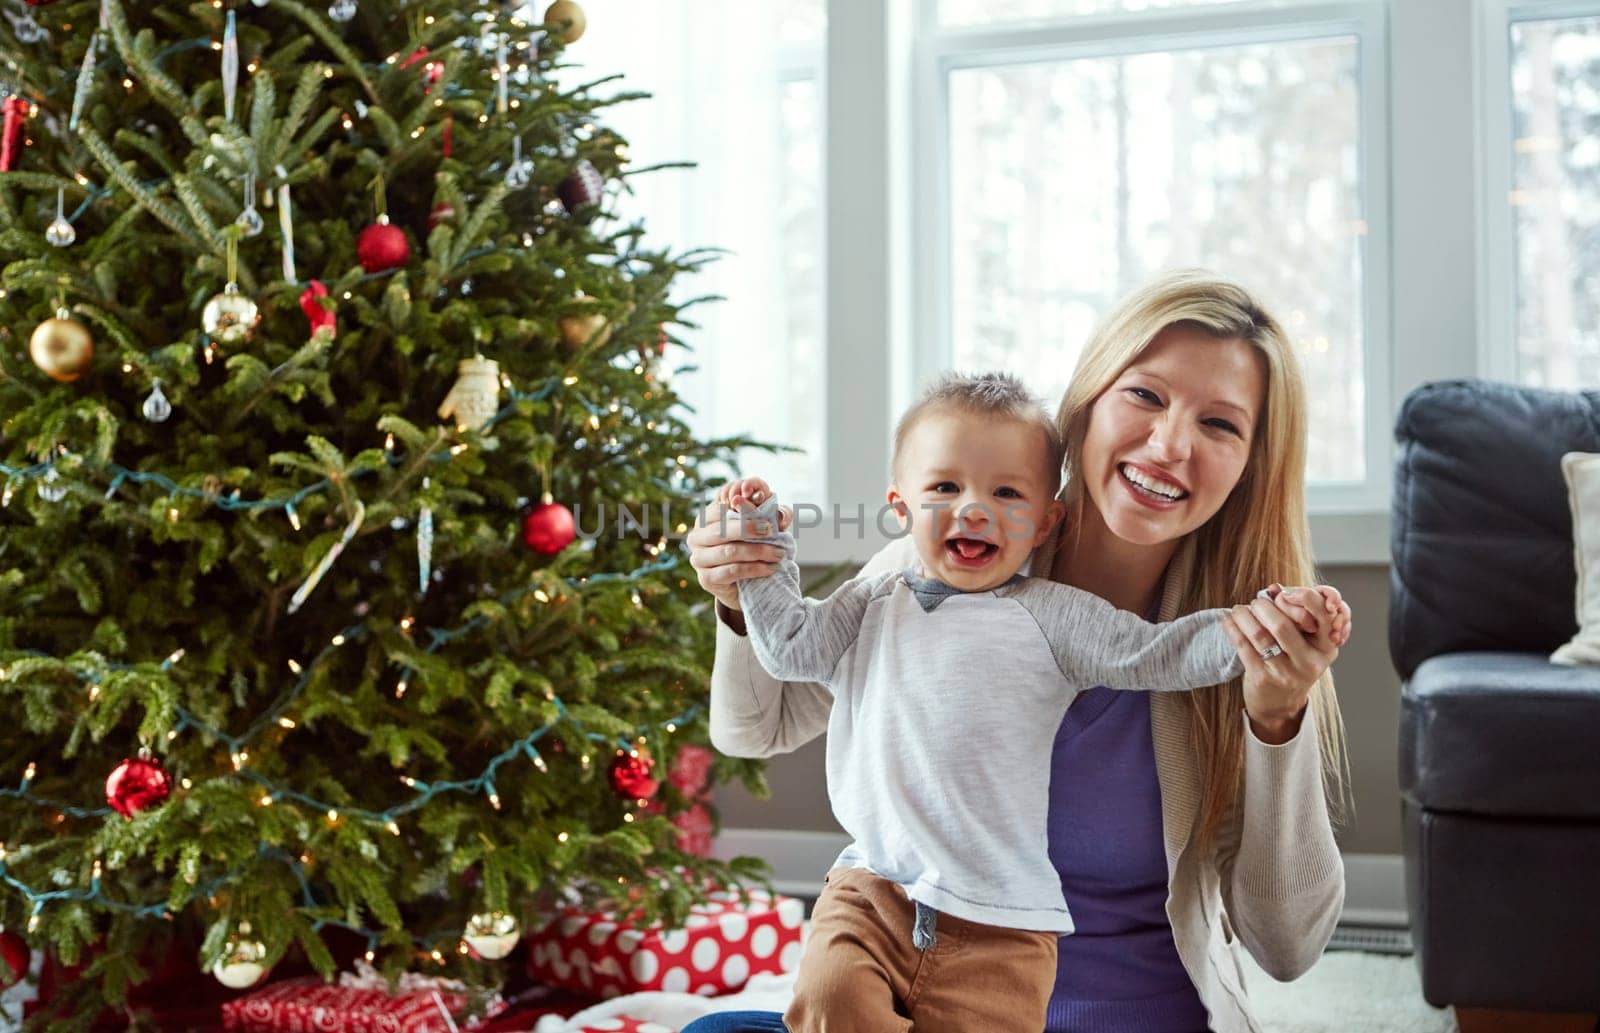 He makes the most wonderful time even more wonderful. a young mother enjoying Christmas with her little boy